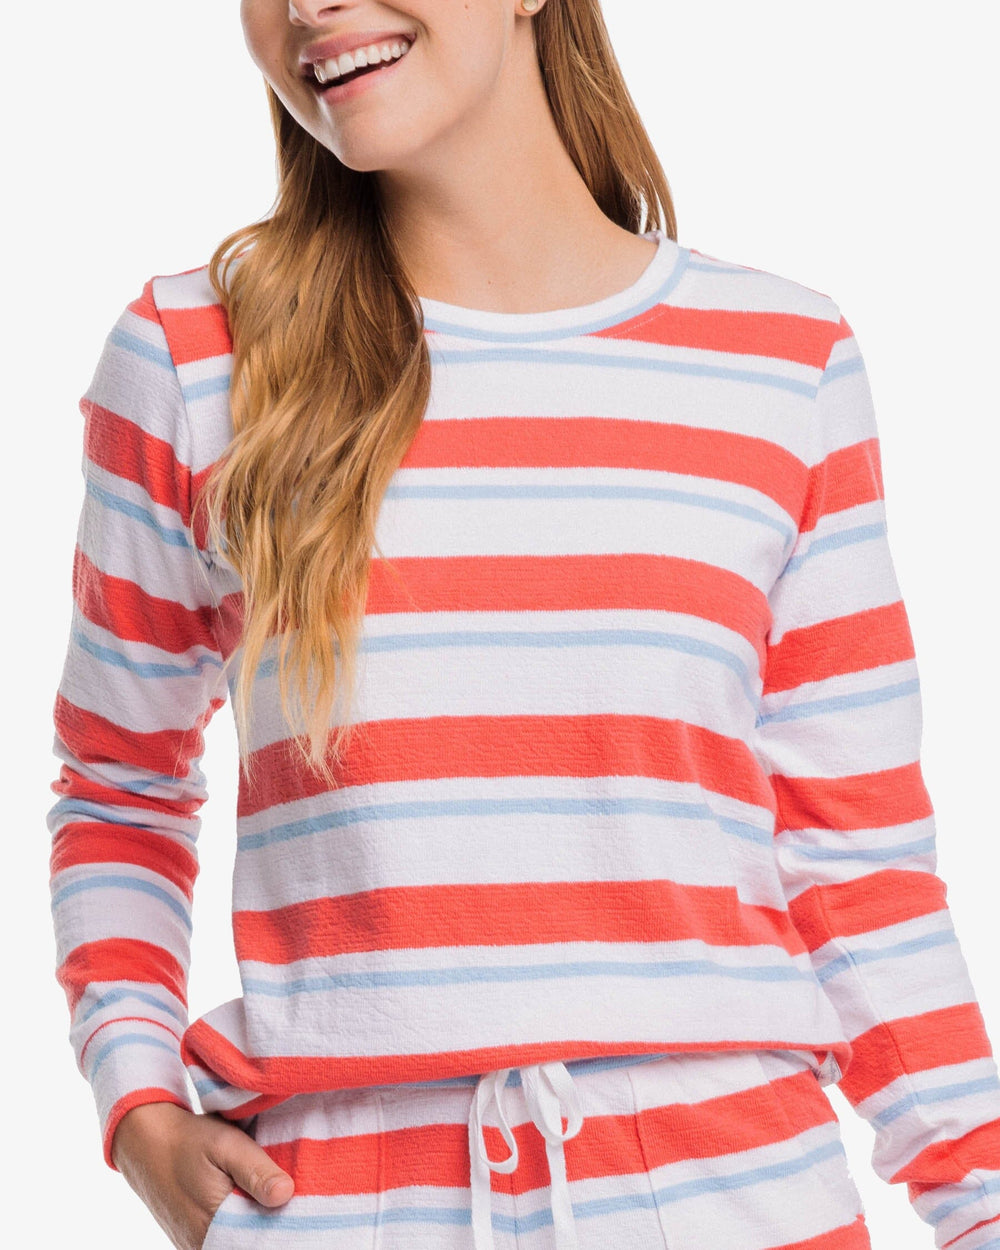 The detail view of the Southern Tide Lana Beach Day Stripe Crew Neck Sweatshirt by Southern Tide - Rosewood Red